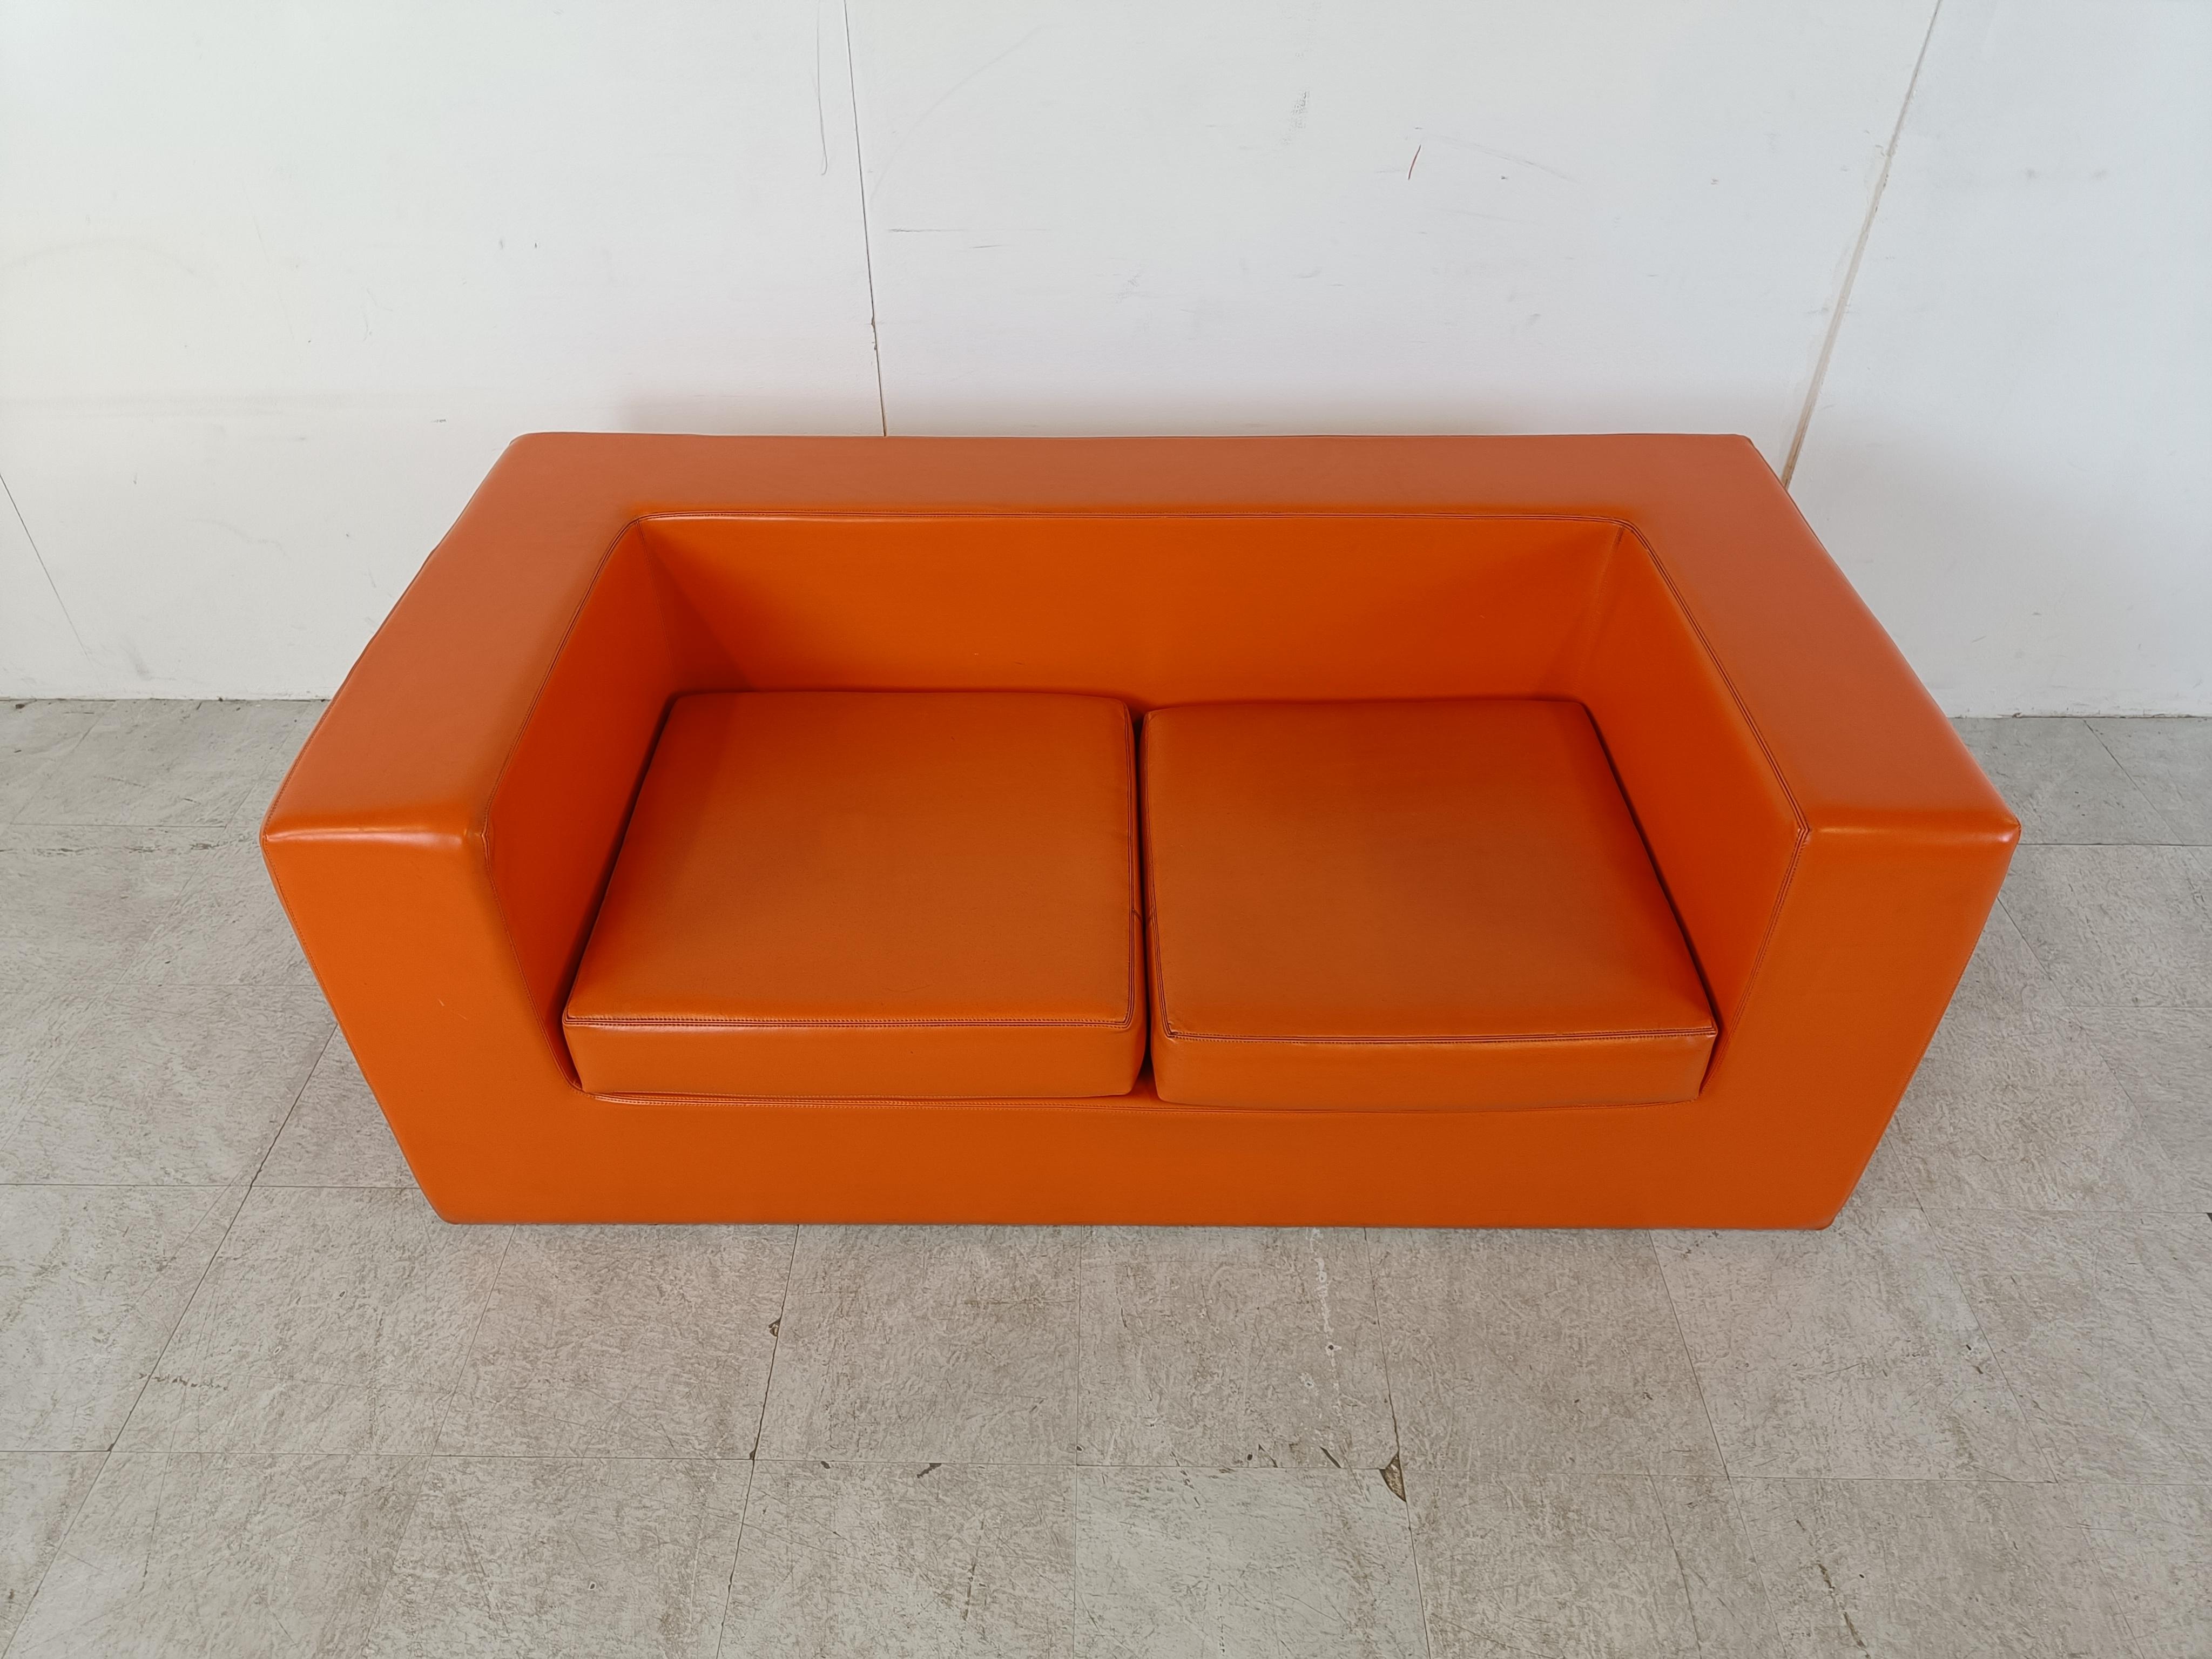 Space Age Throw Away Sofa by Willie Landels for Zanotta, 1970s